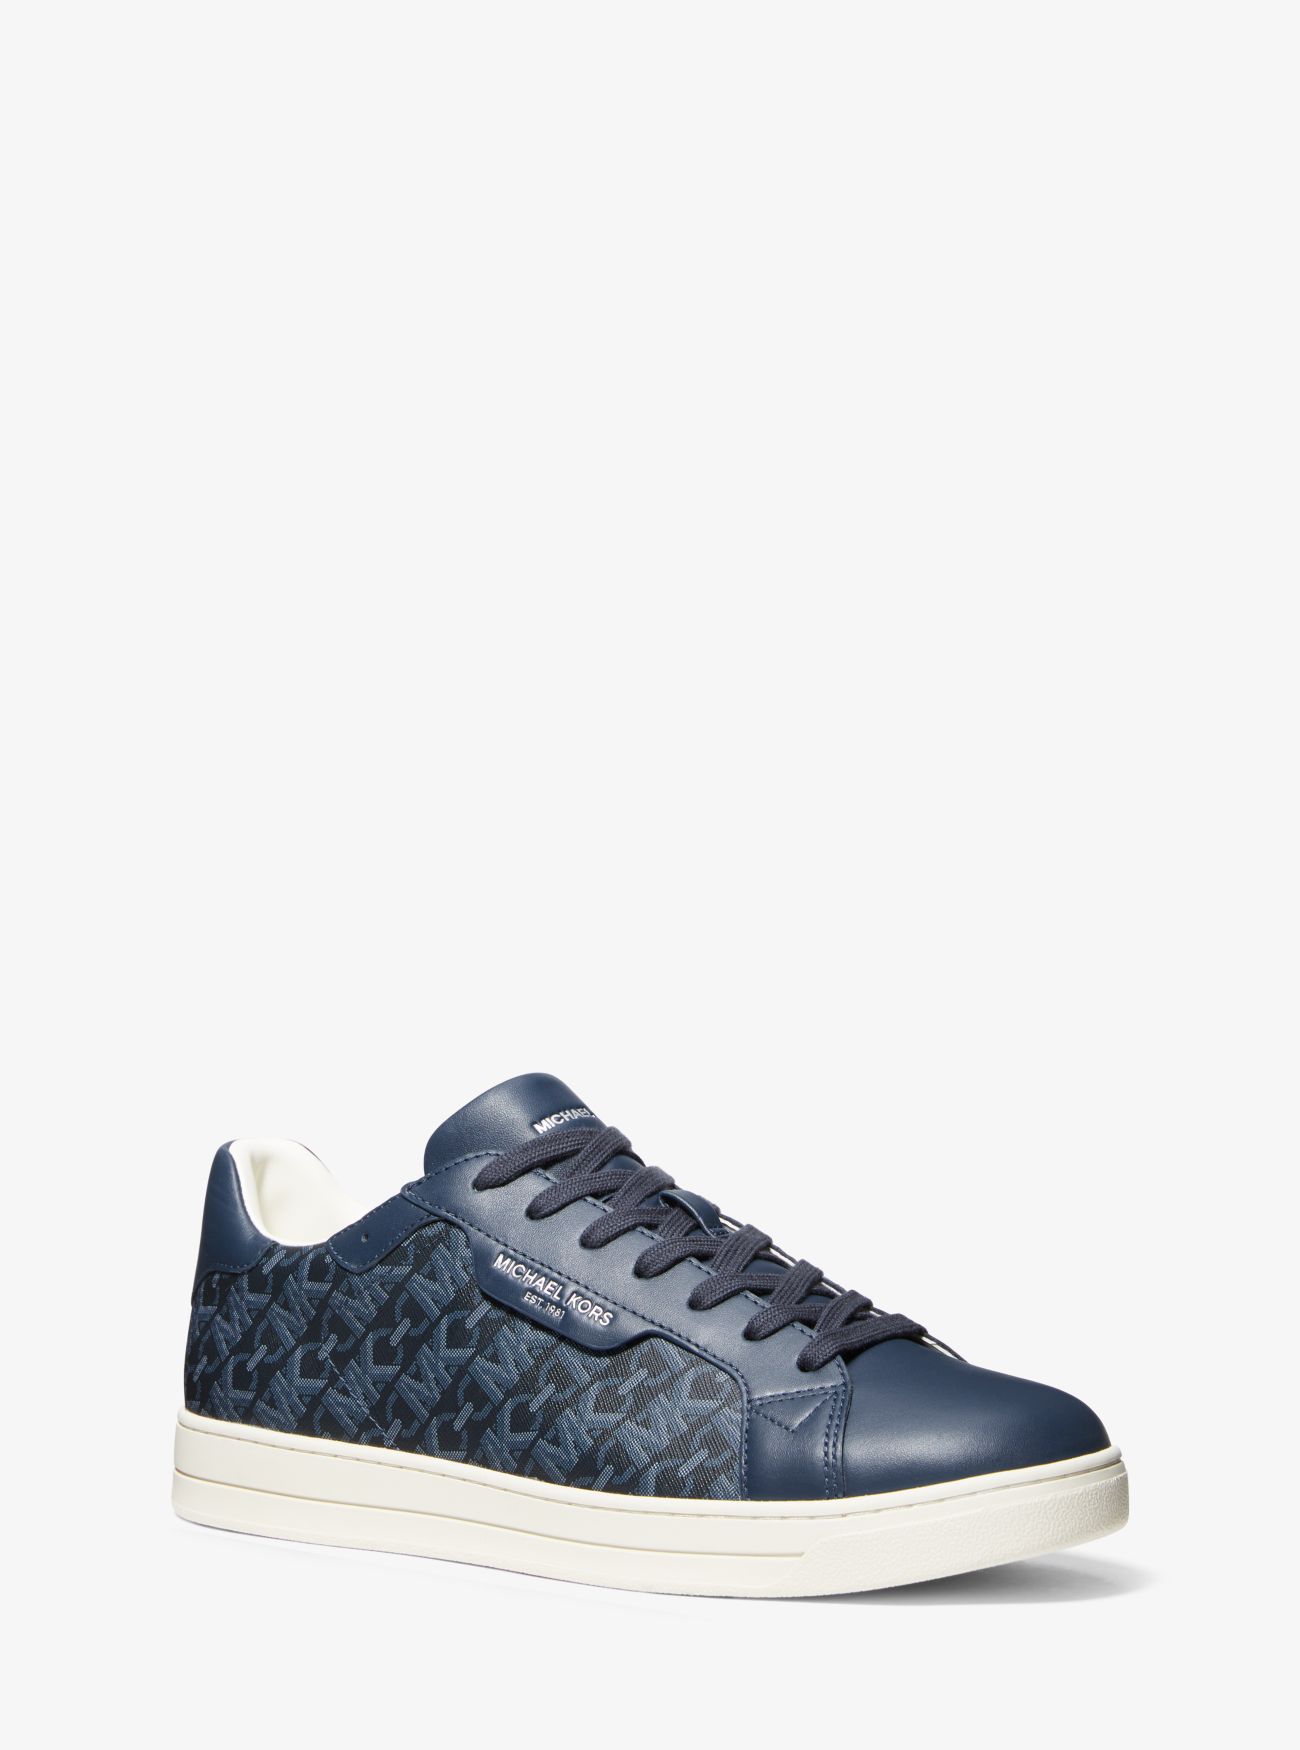 MK Keating Empire Signature Logo and Leather Trainers - Blue - Michael Kors